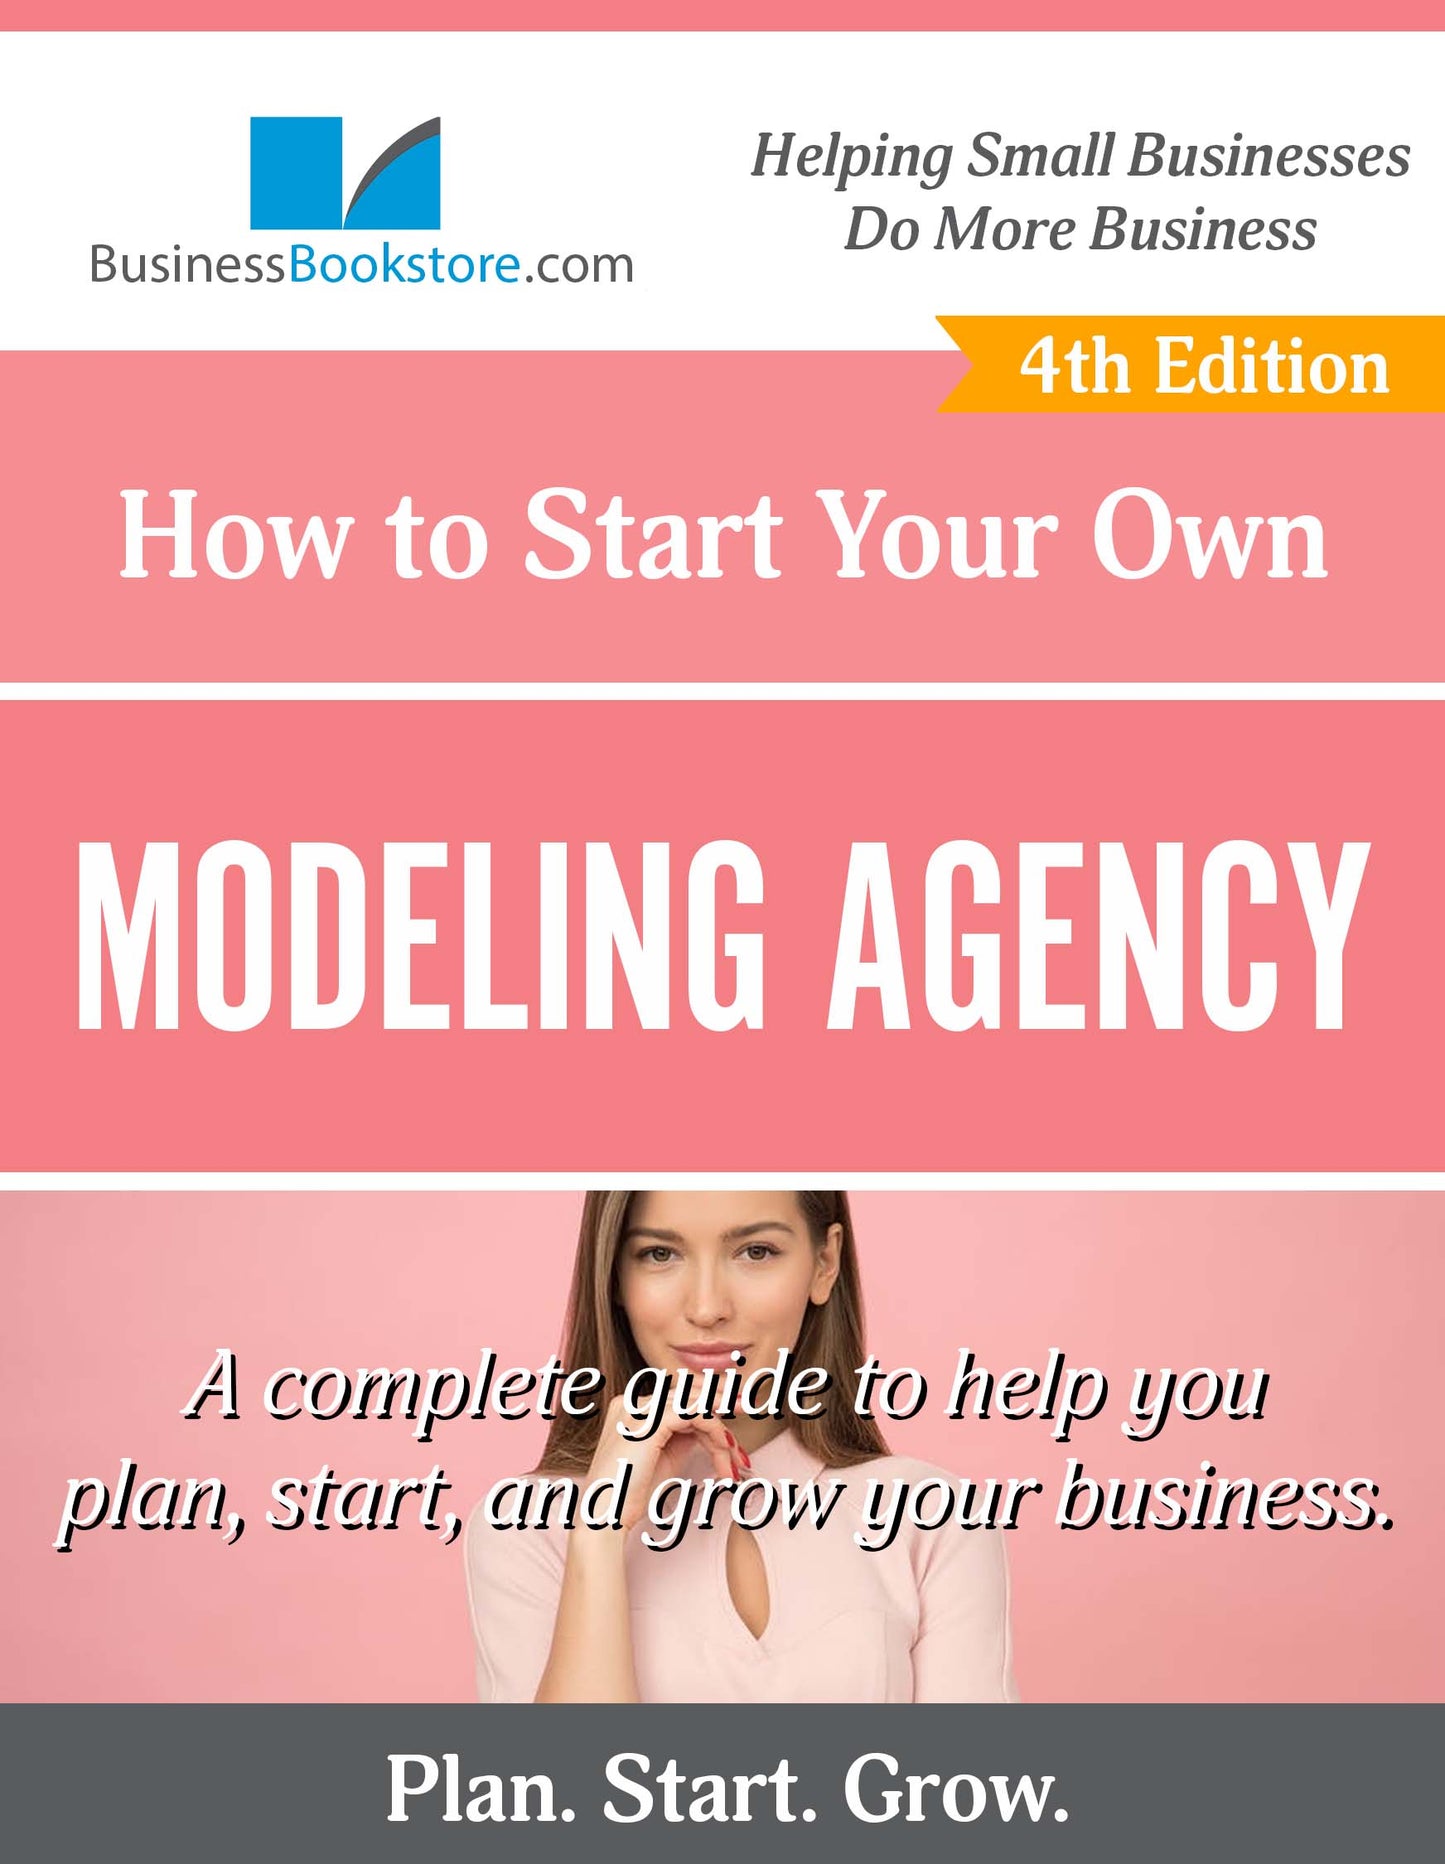 How to Start a Modeling Agency